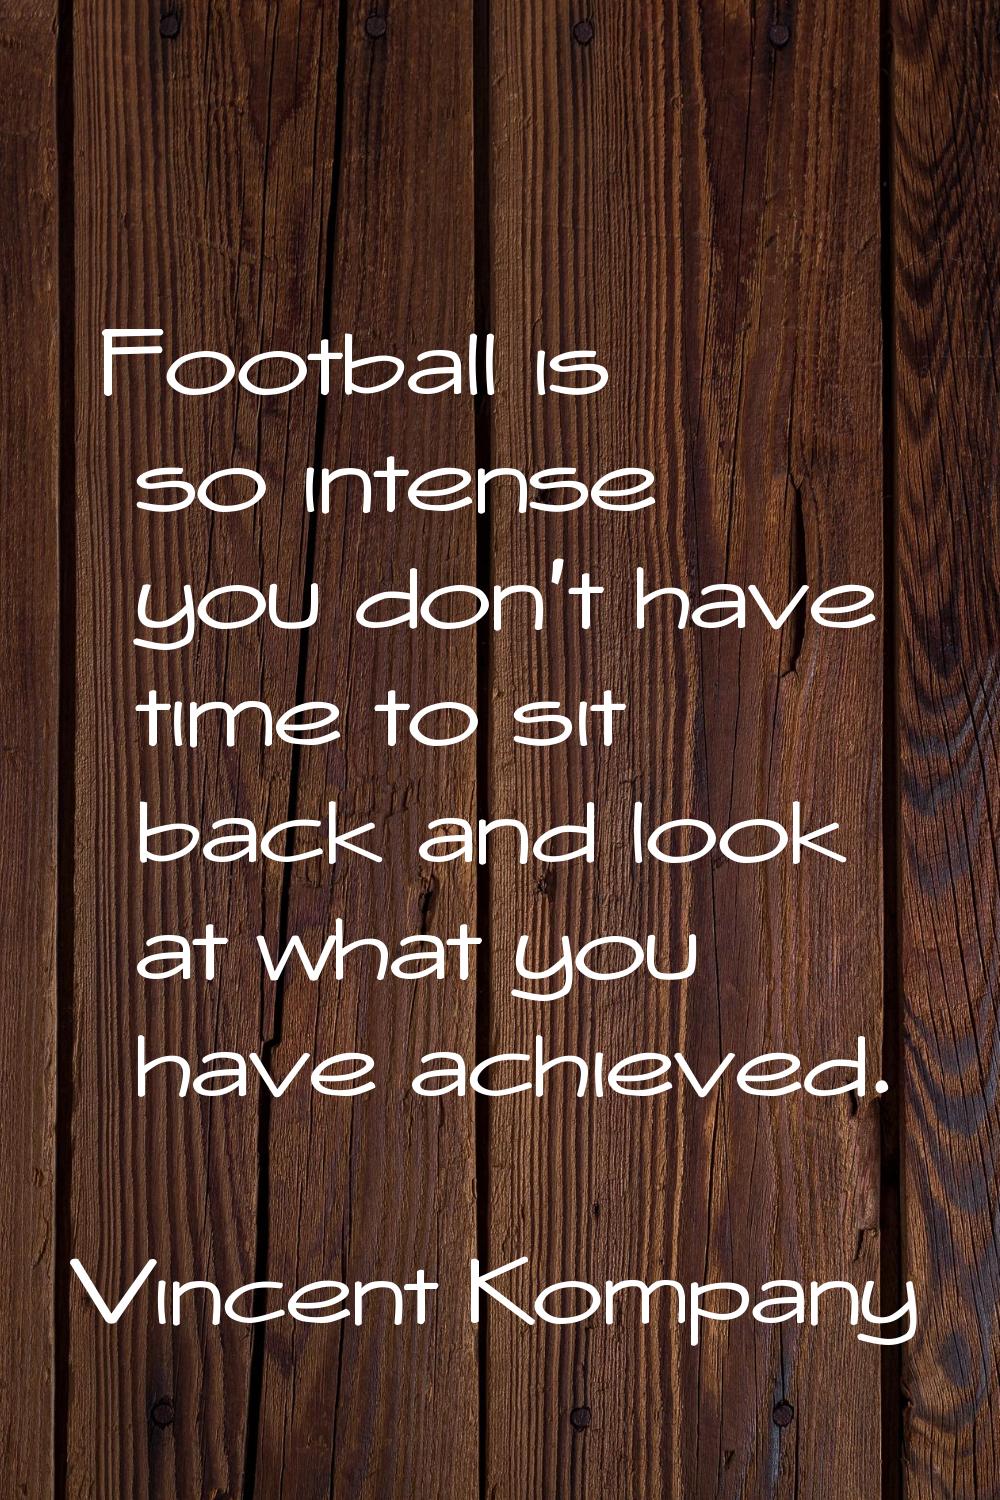 Football is so intense you don't have time to sit back and look at what you have achieved.